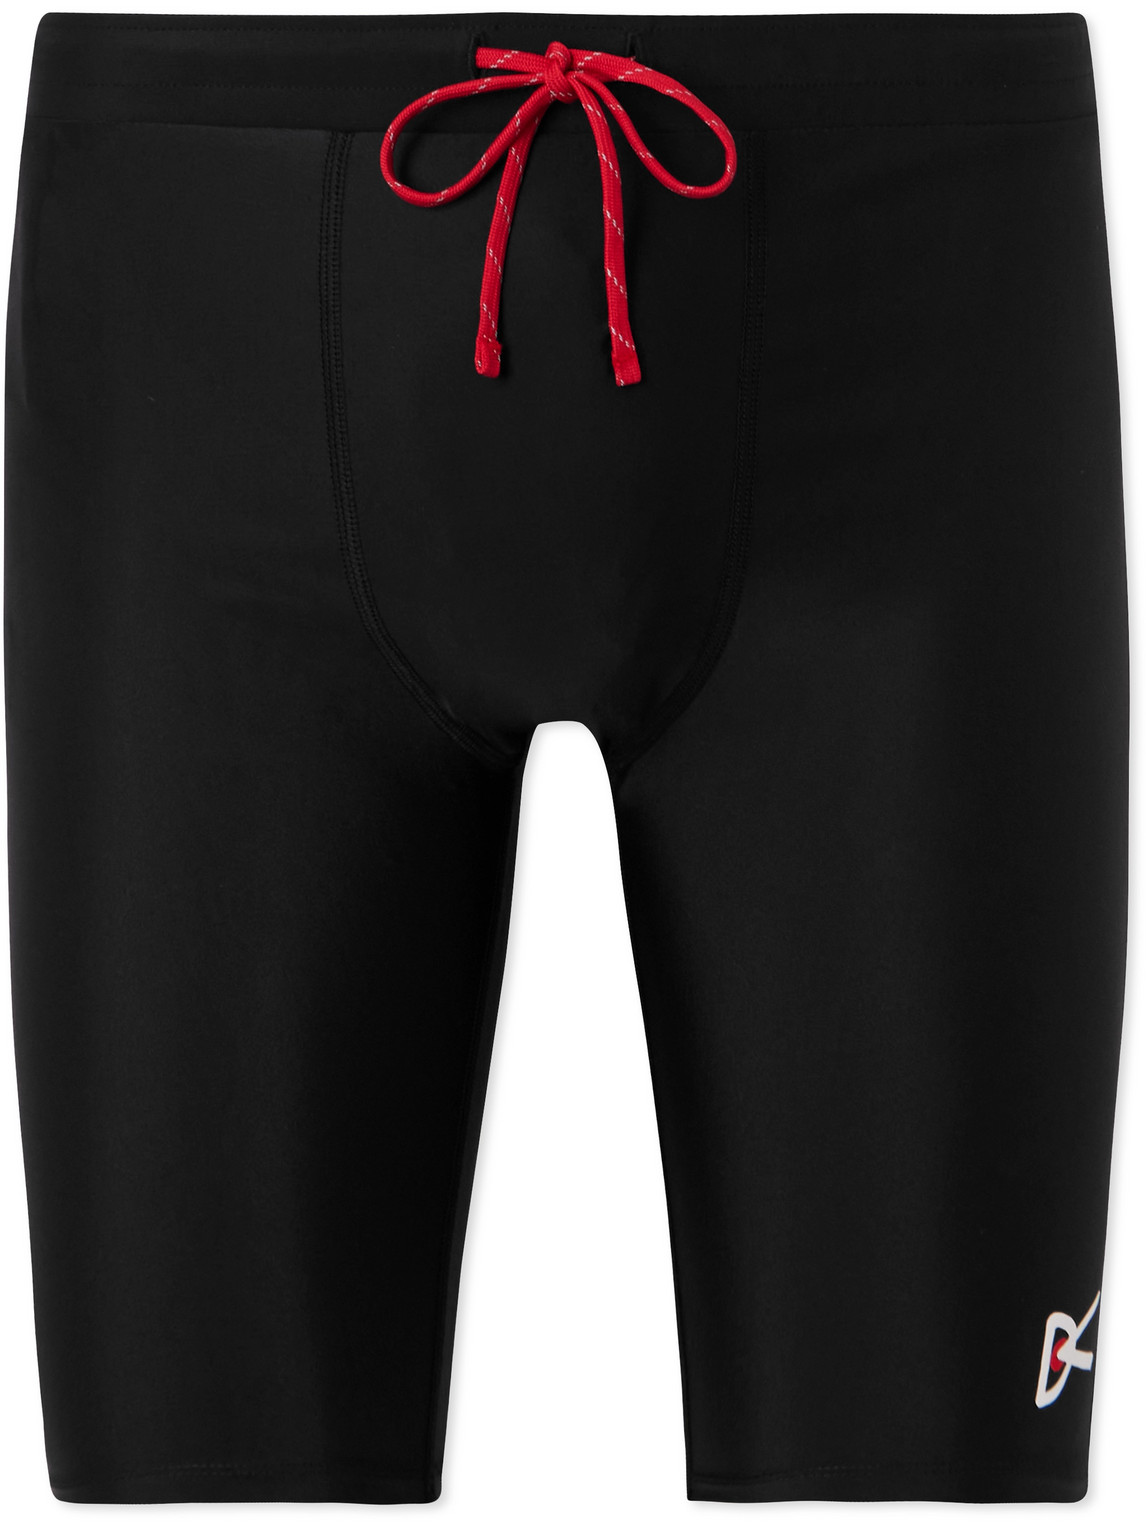 DISTRICT VISION - TomTom Speed Tight Stretch Recycled-Shell Shorts - Men - Black - M von DISTRICT VISION